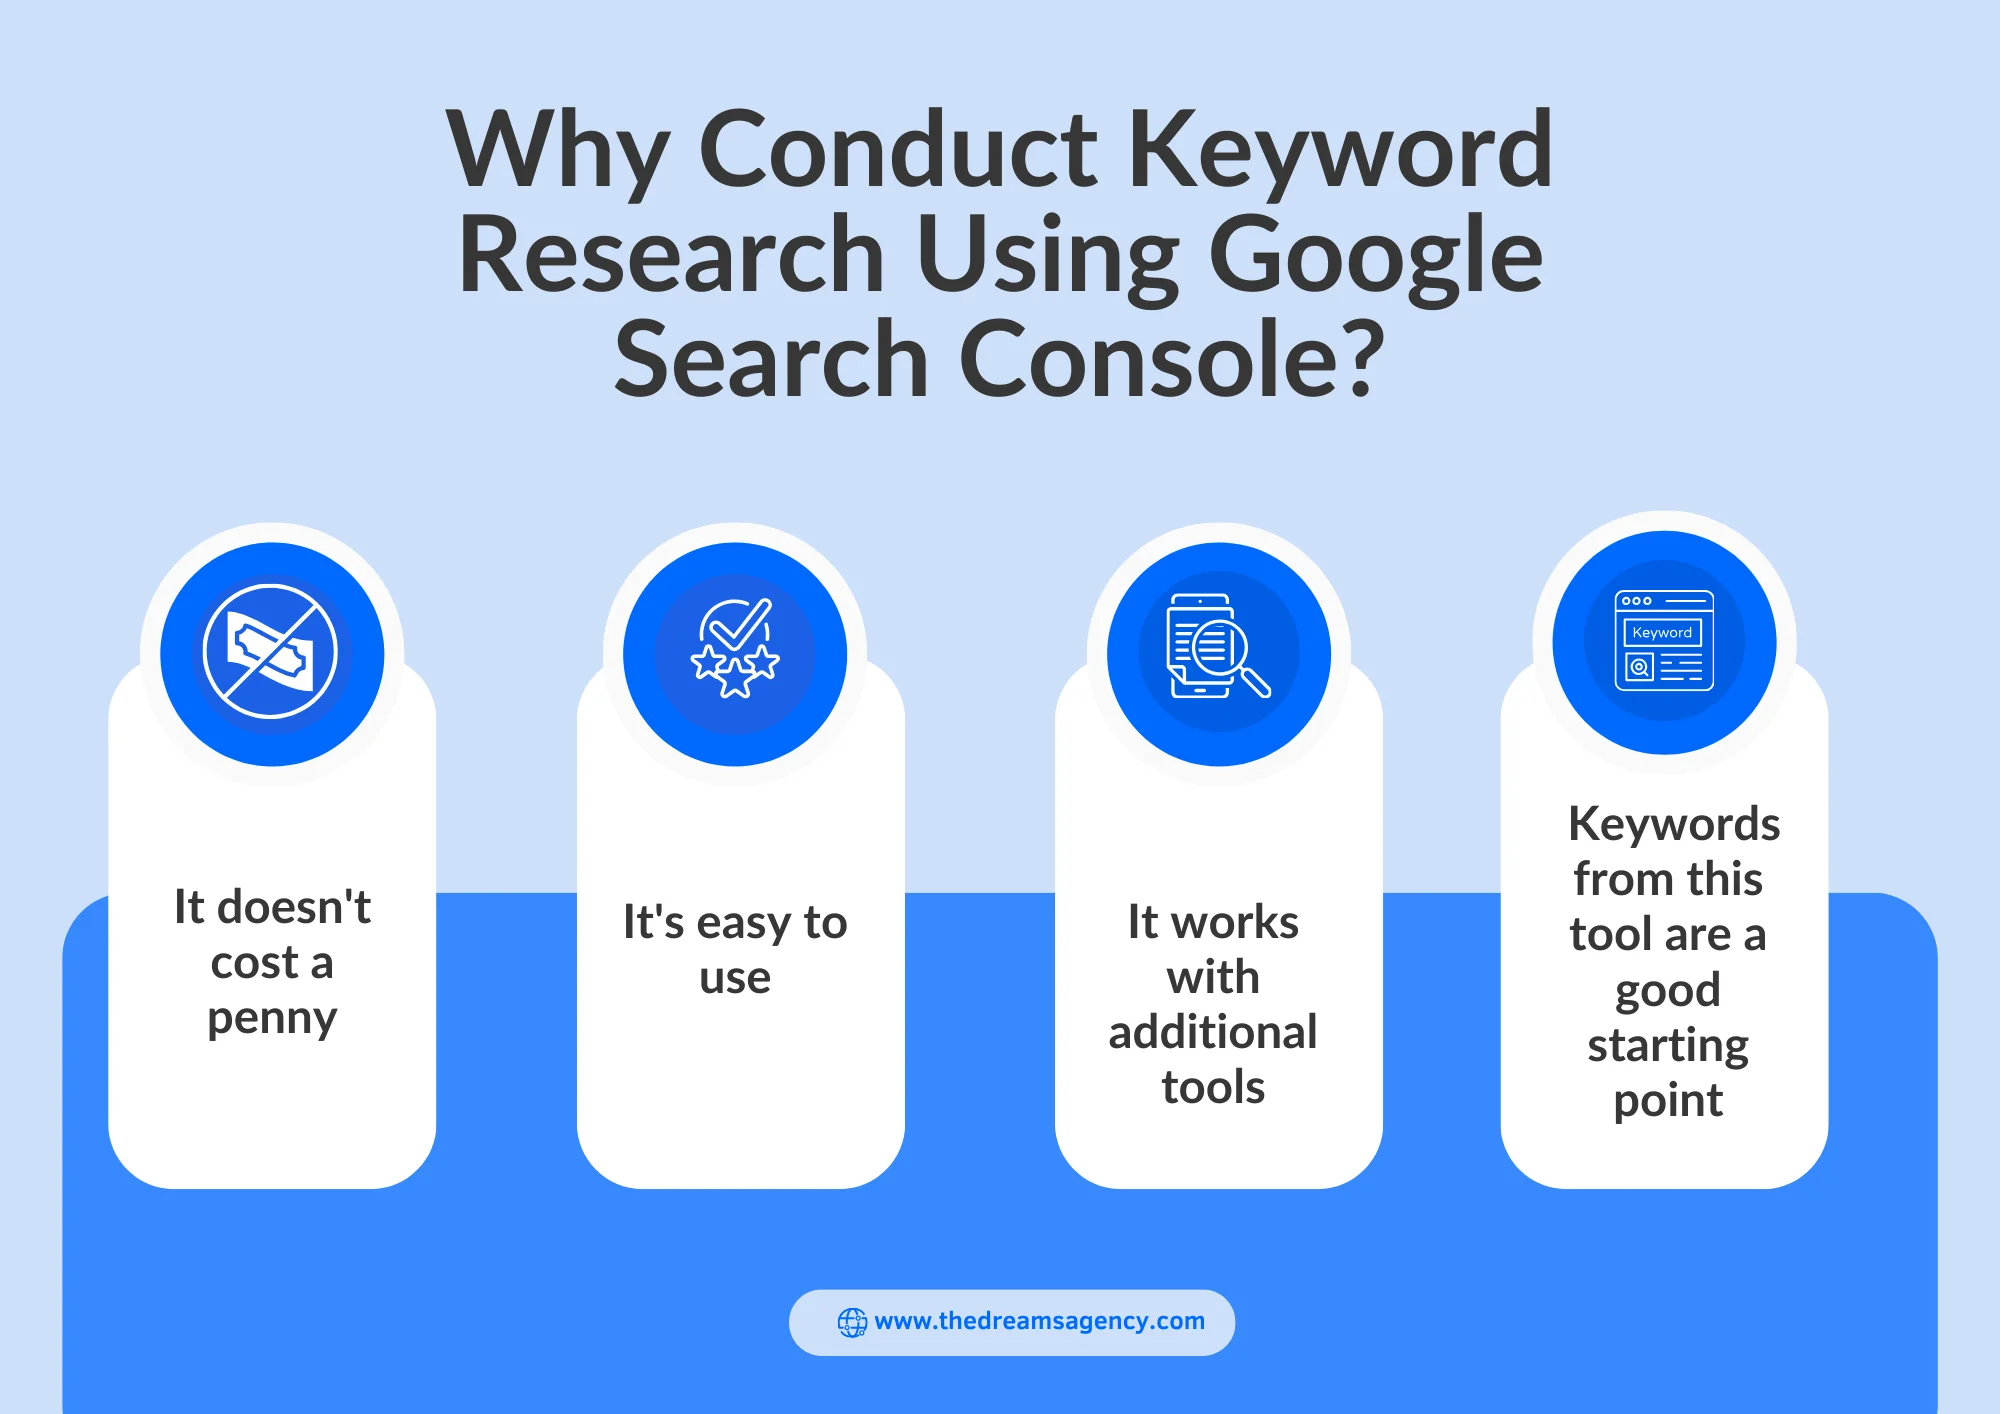 An infographic on the importance of using Google search console keywords